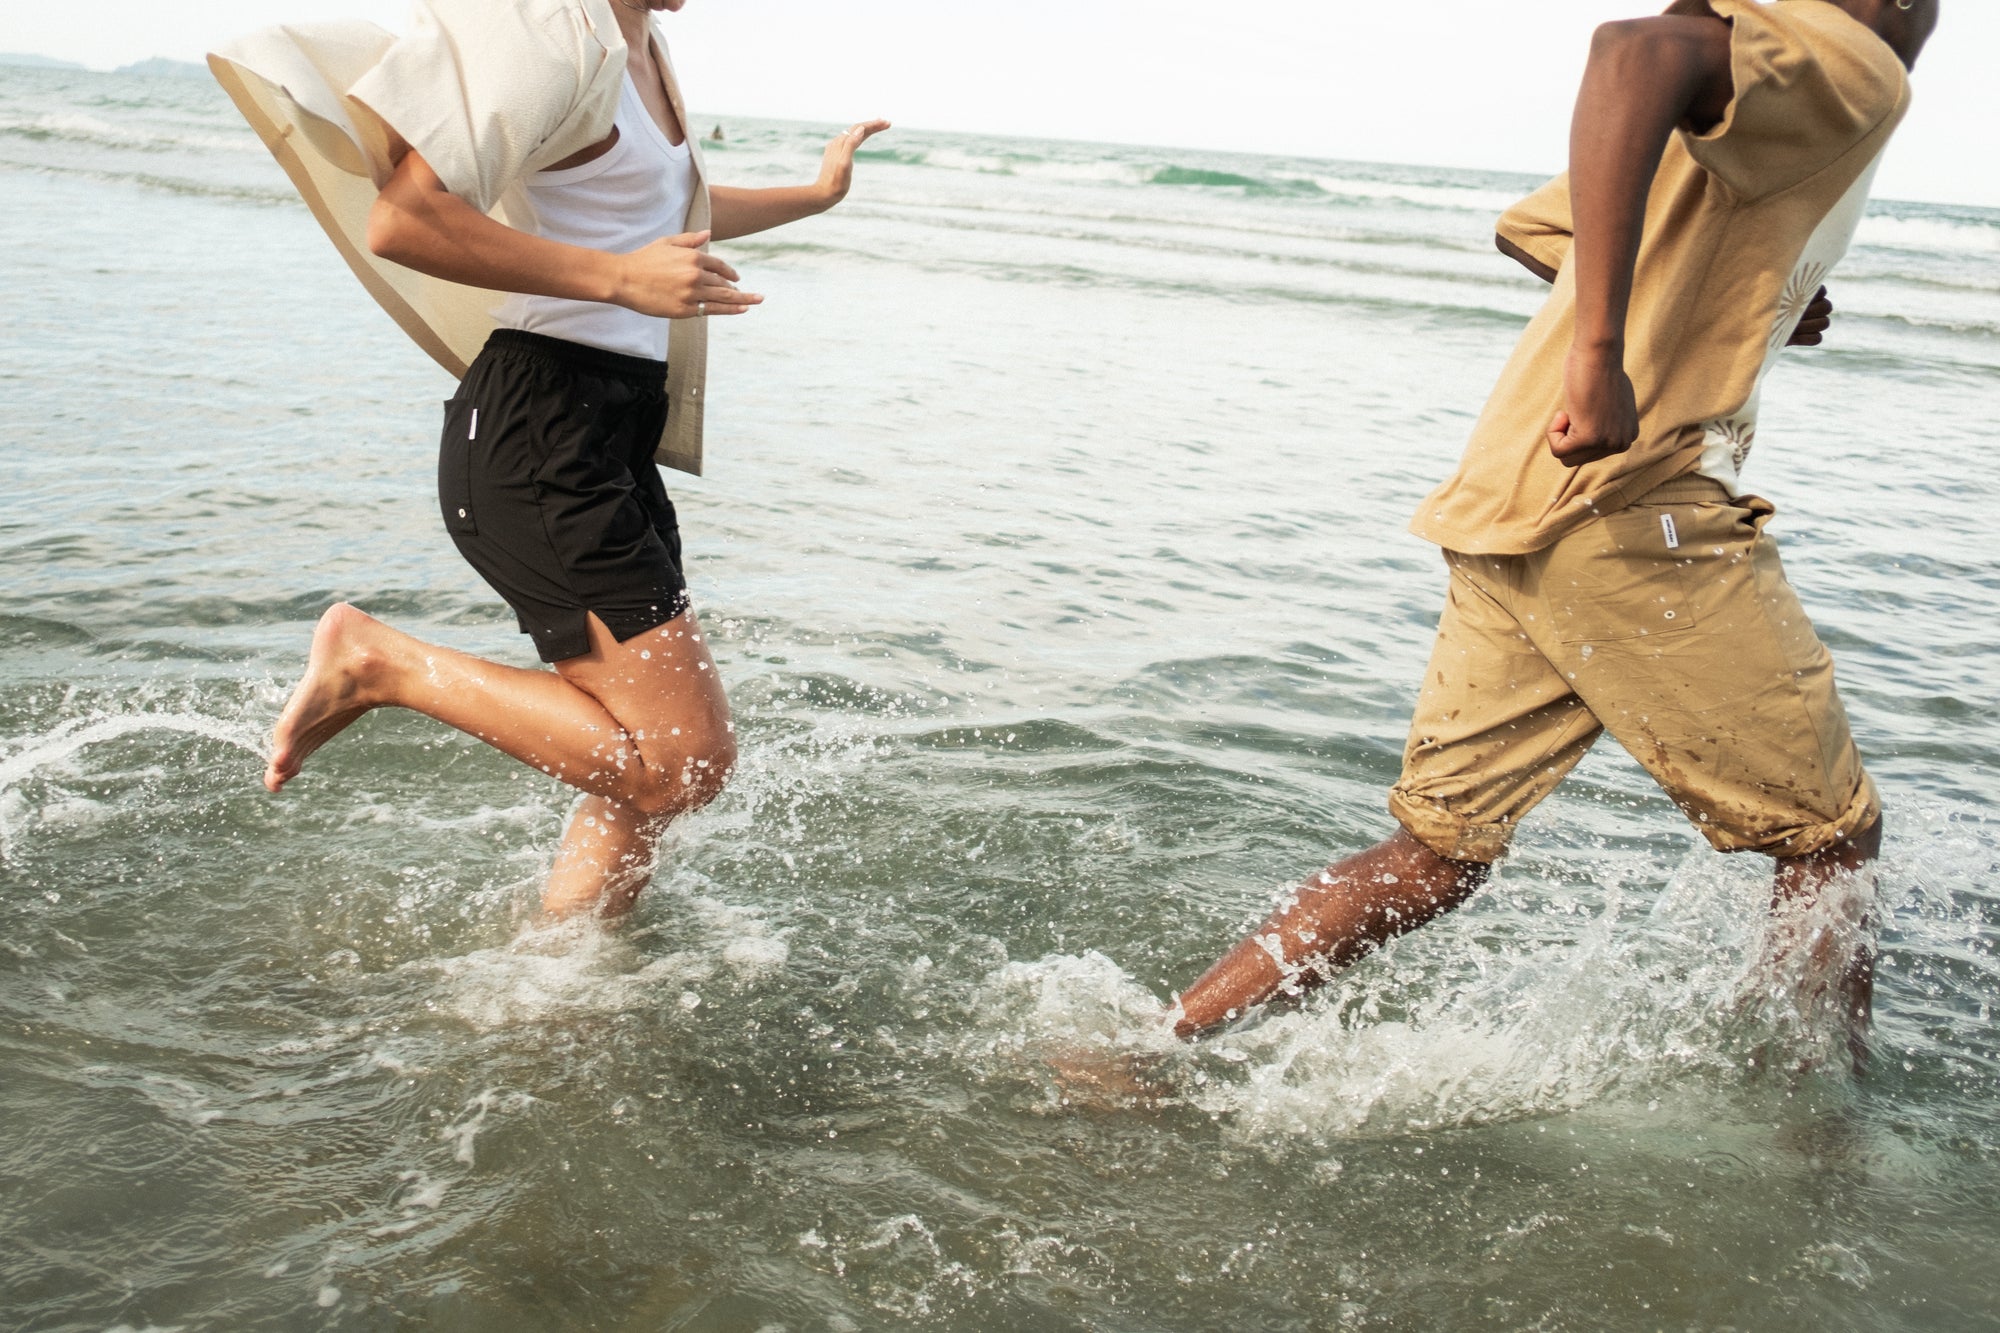 Two people running in the ocean